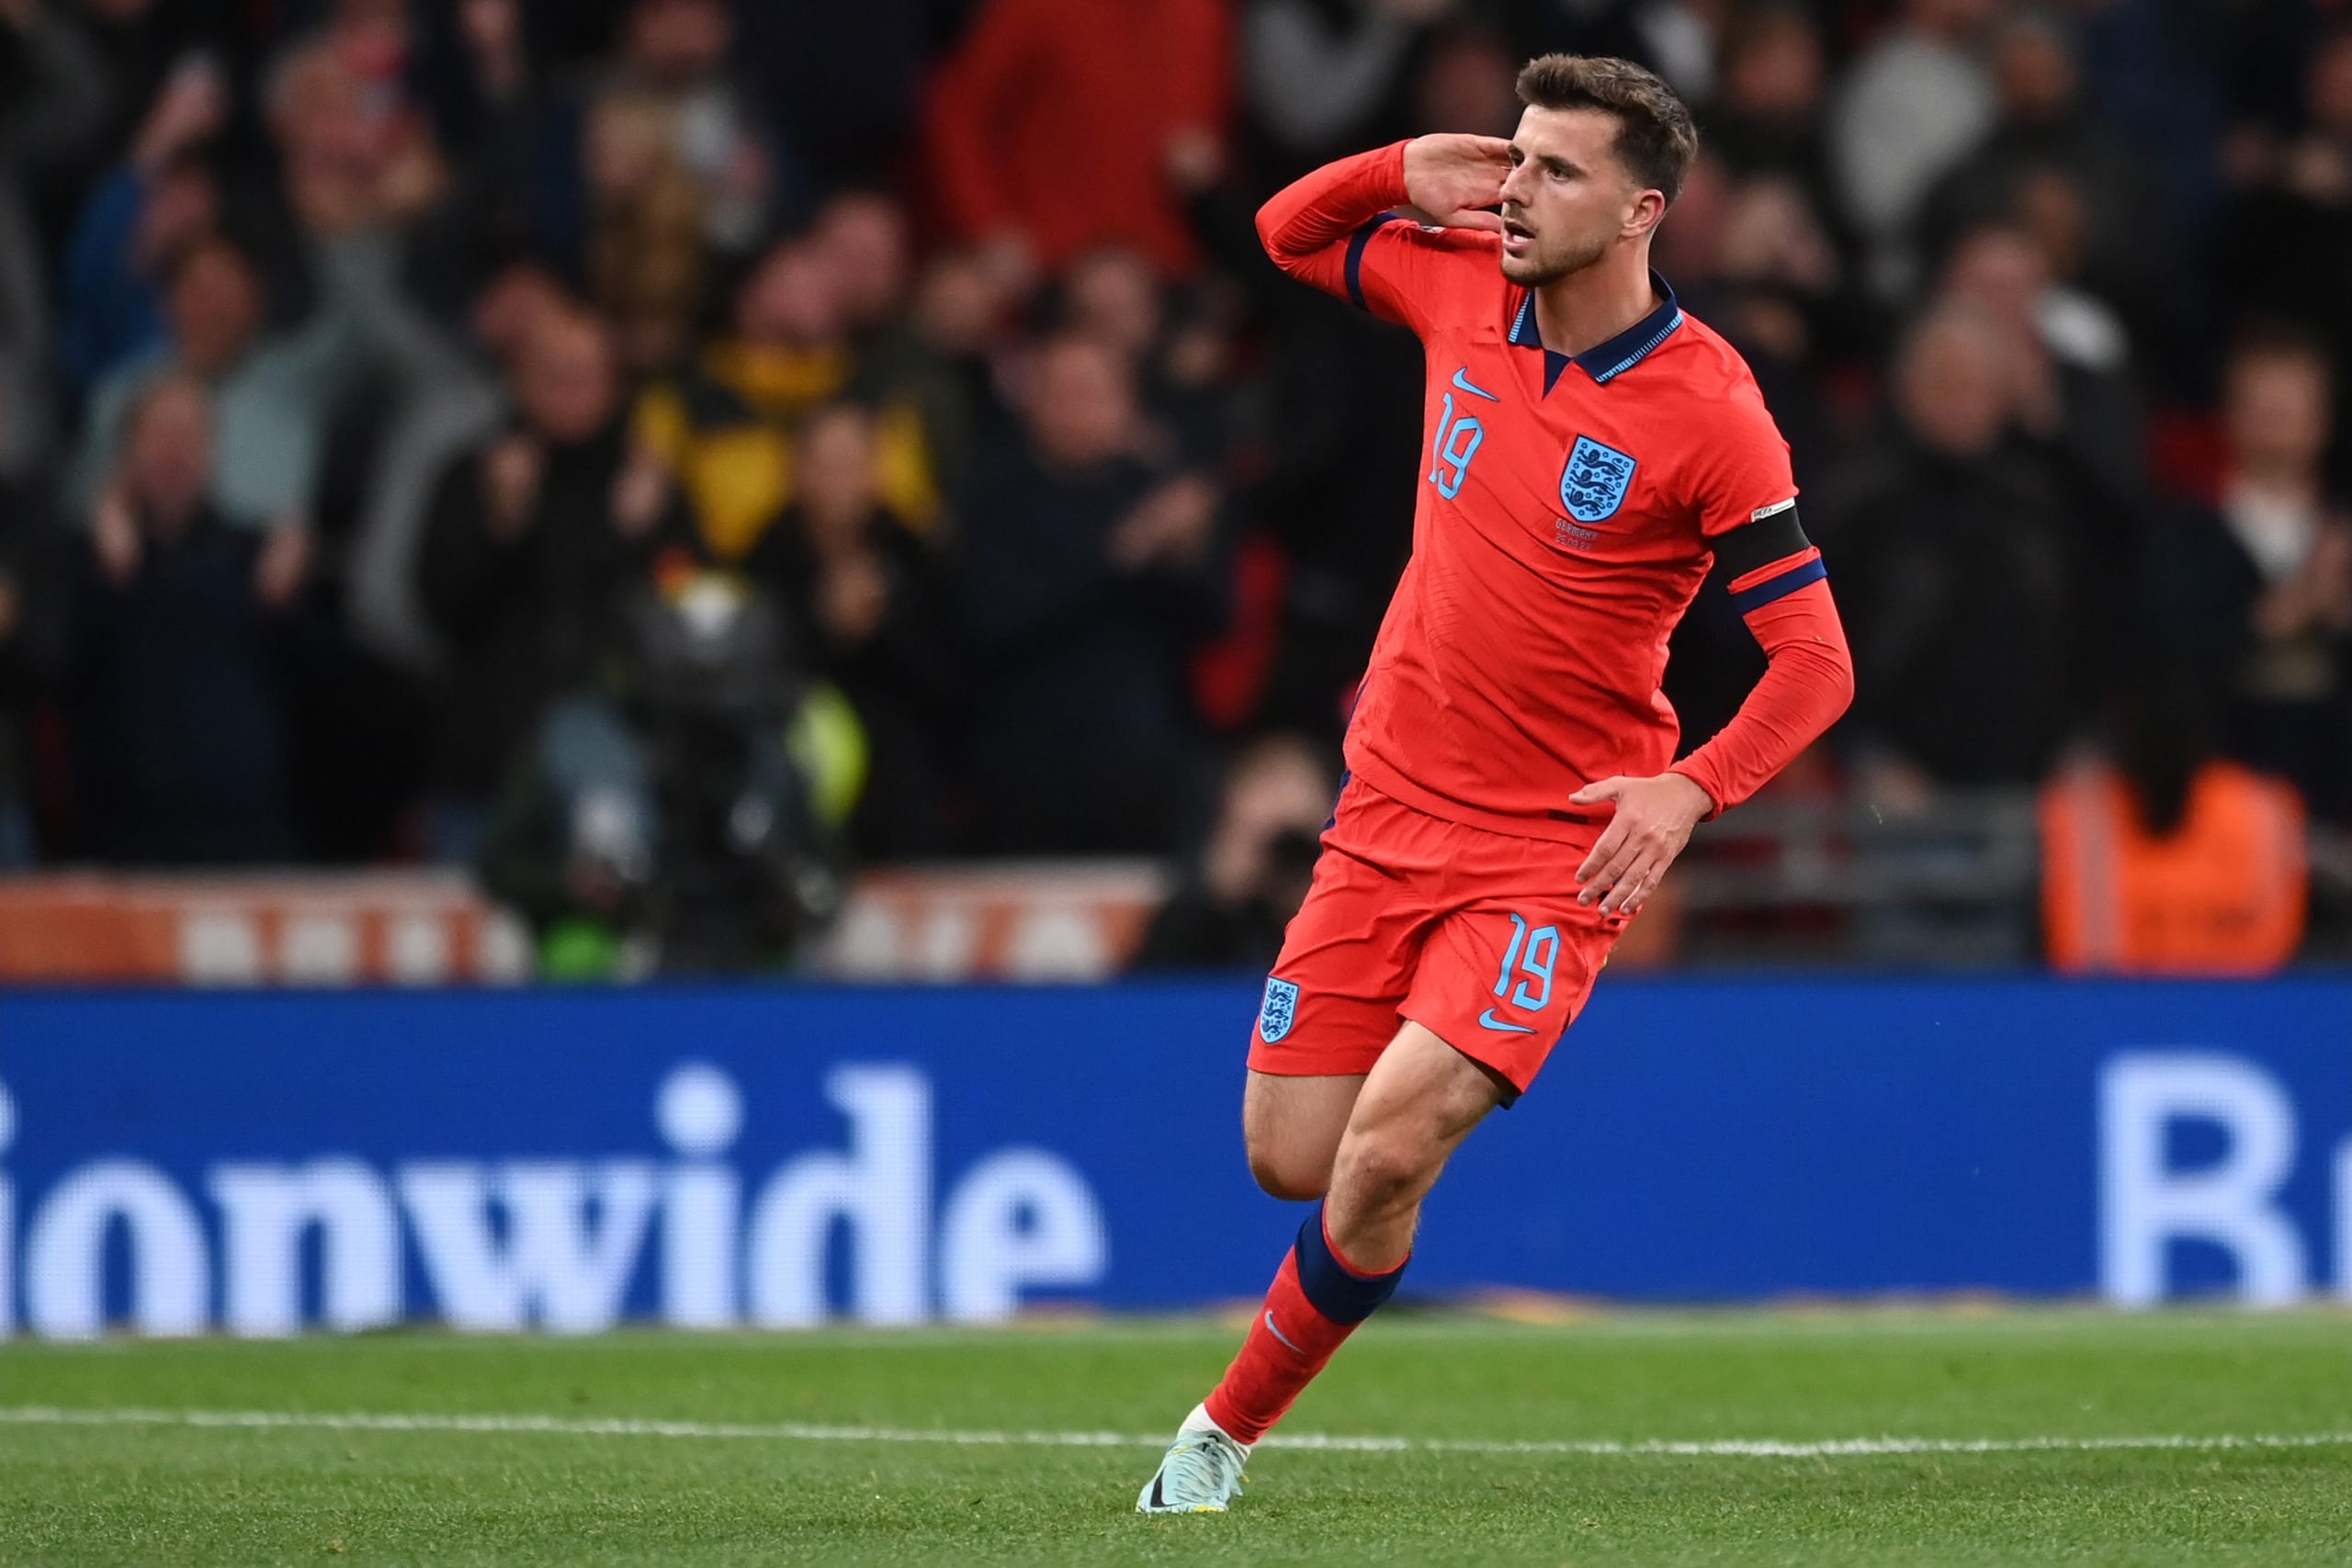 Mason Mount levelled matters for England in the second half against Germany